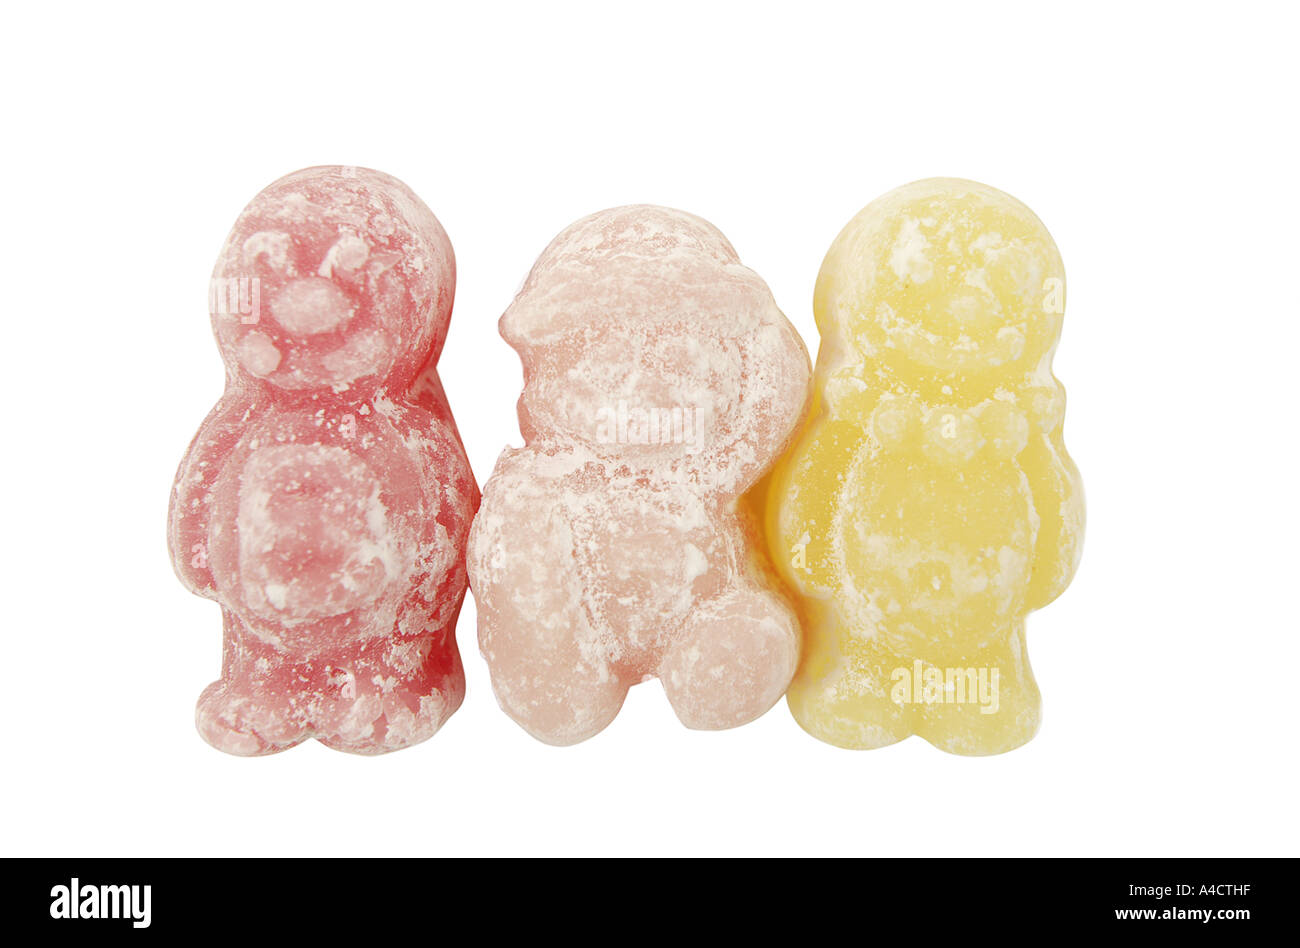 family of teddy bear sweets offering inherent concepts of family numbers parents and children Stock Photo